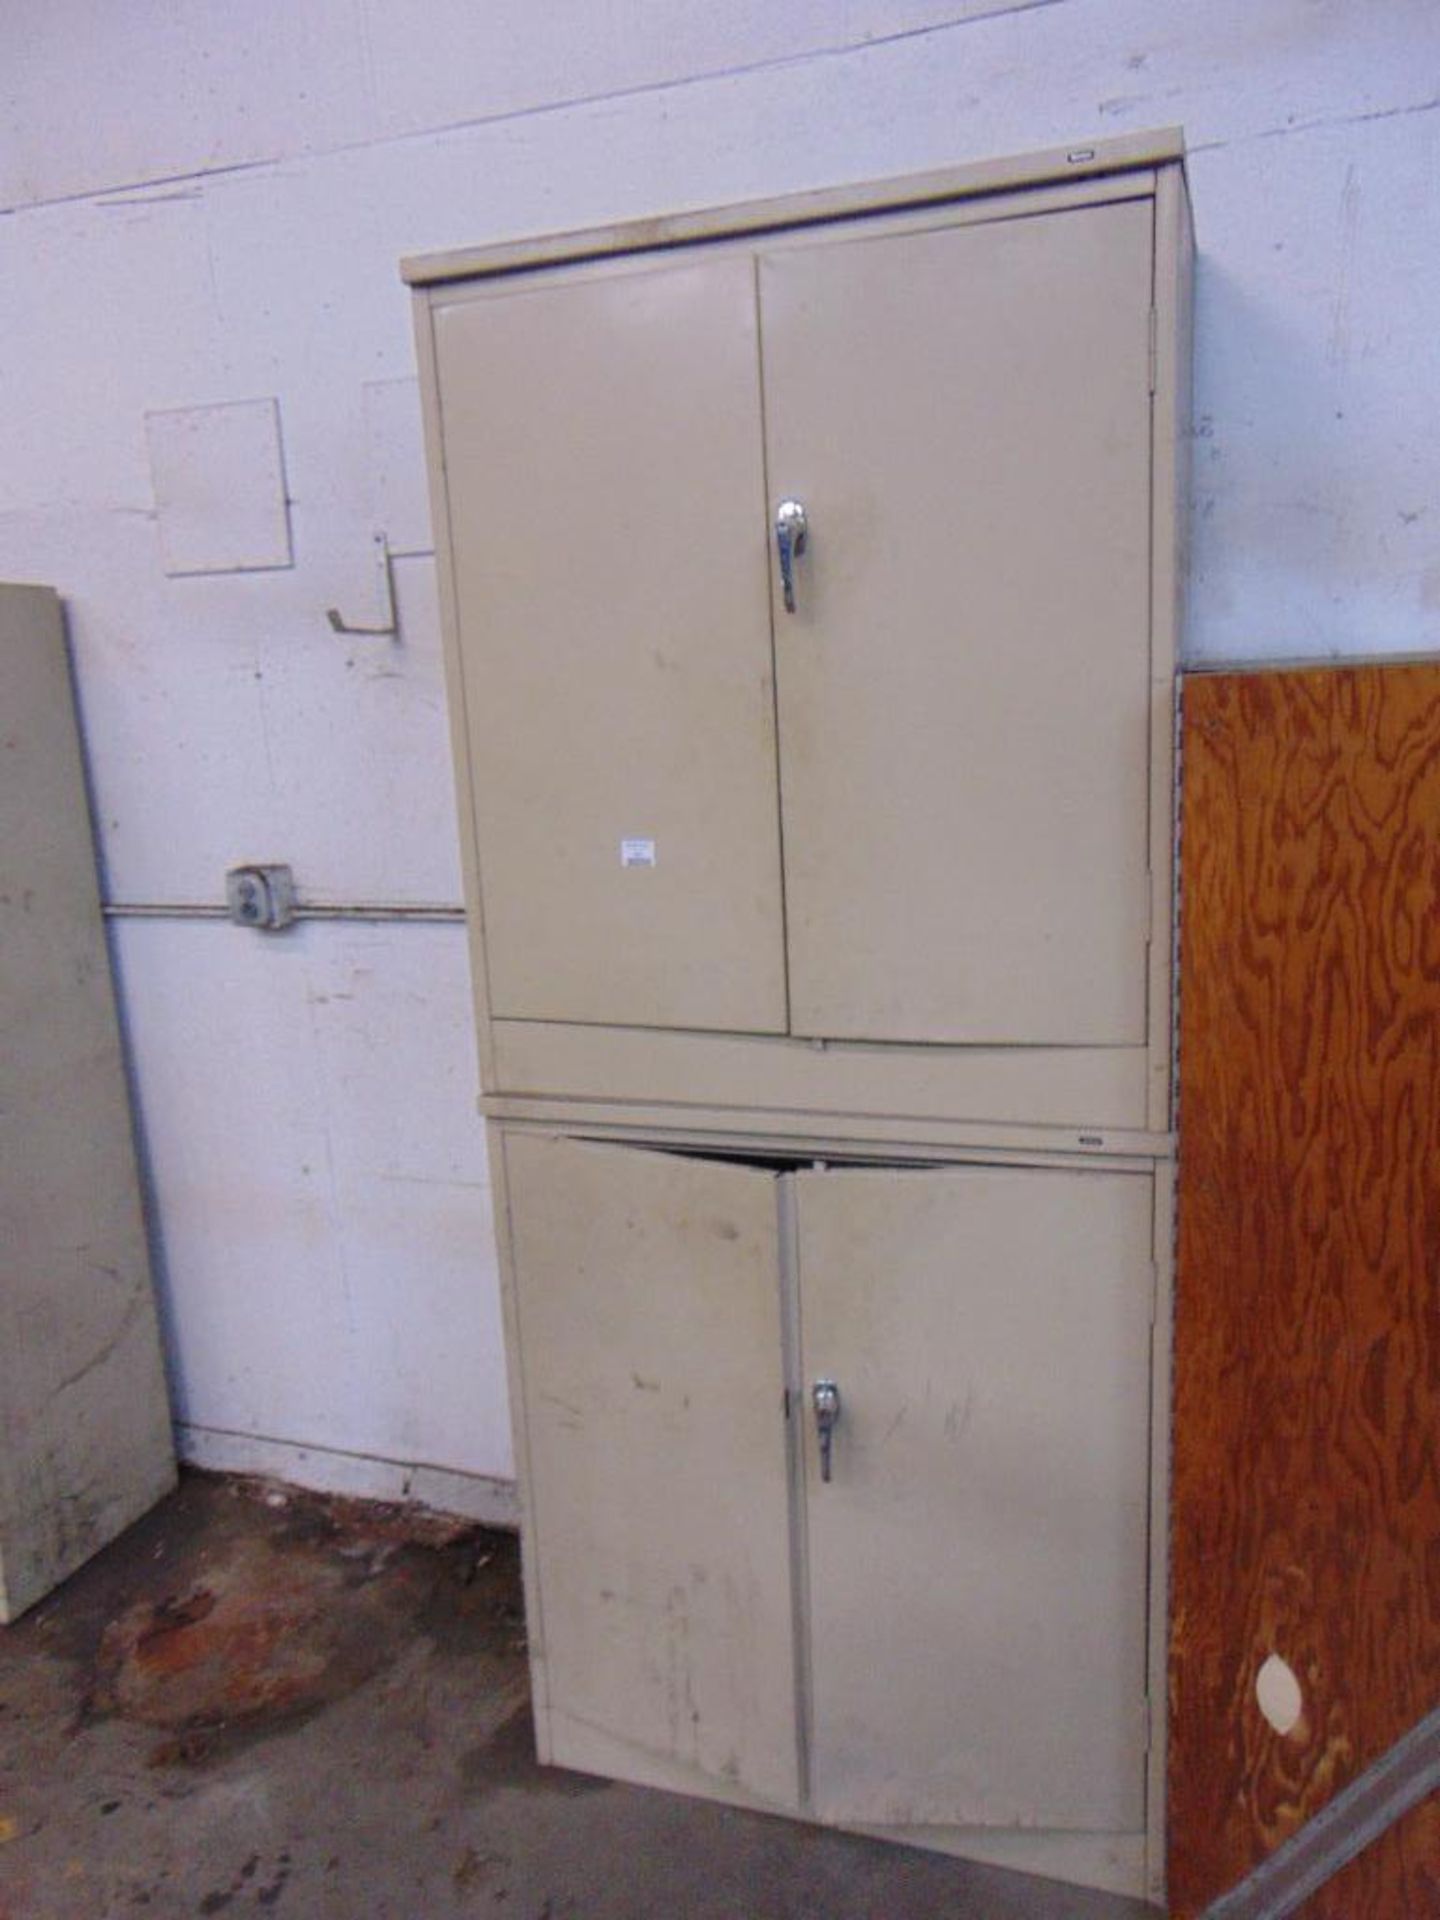 Metal Cabinet and Contents*